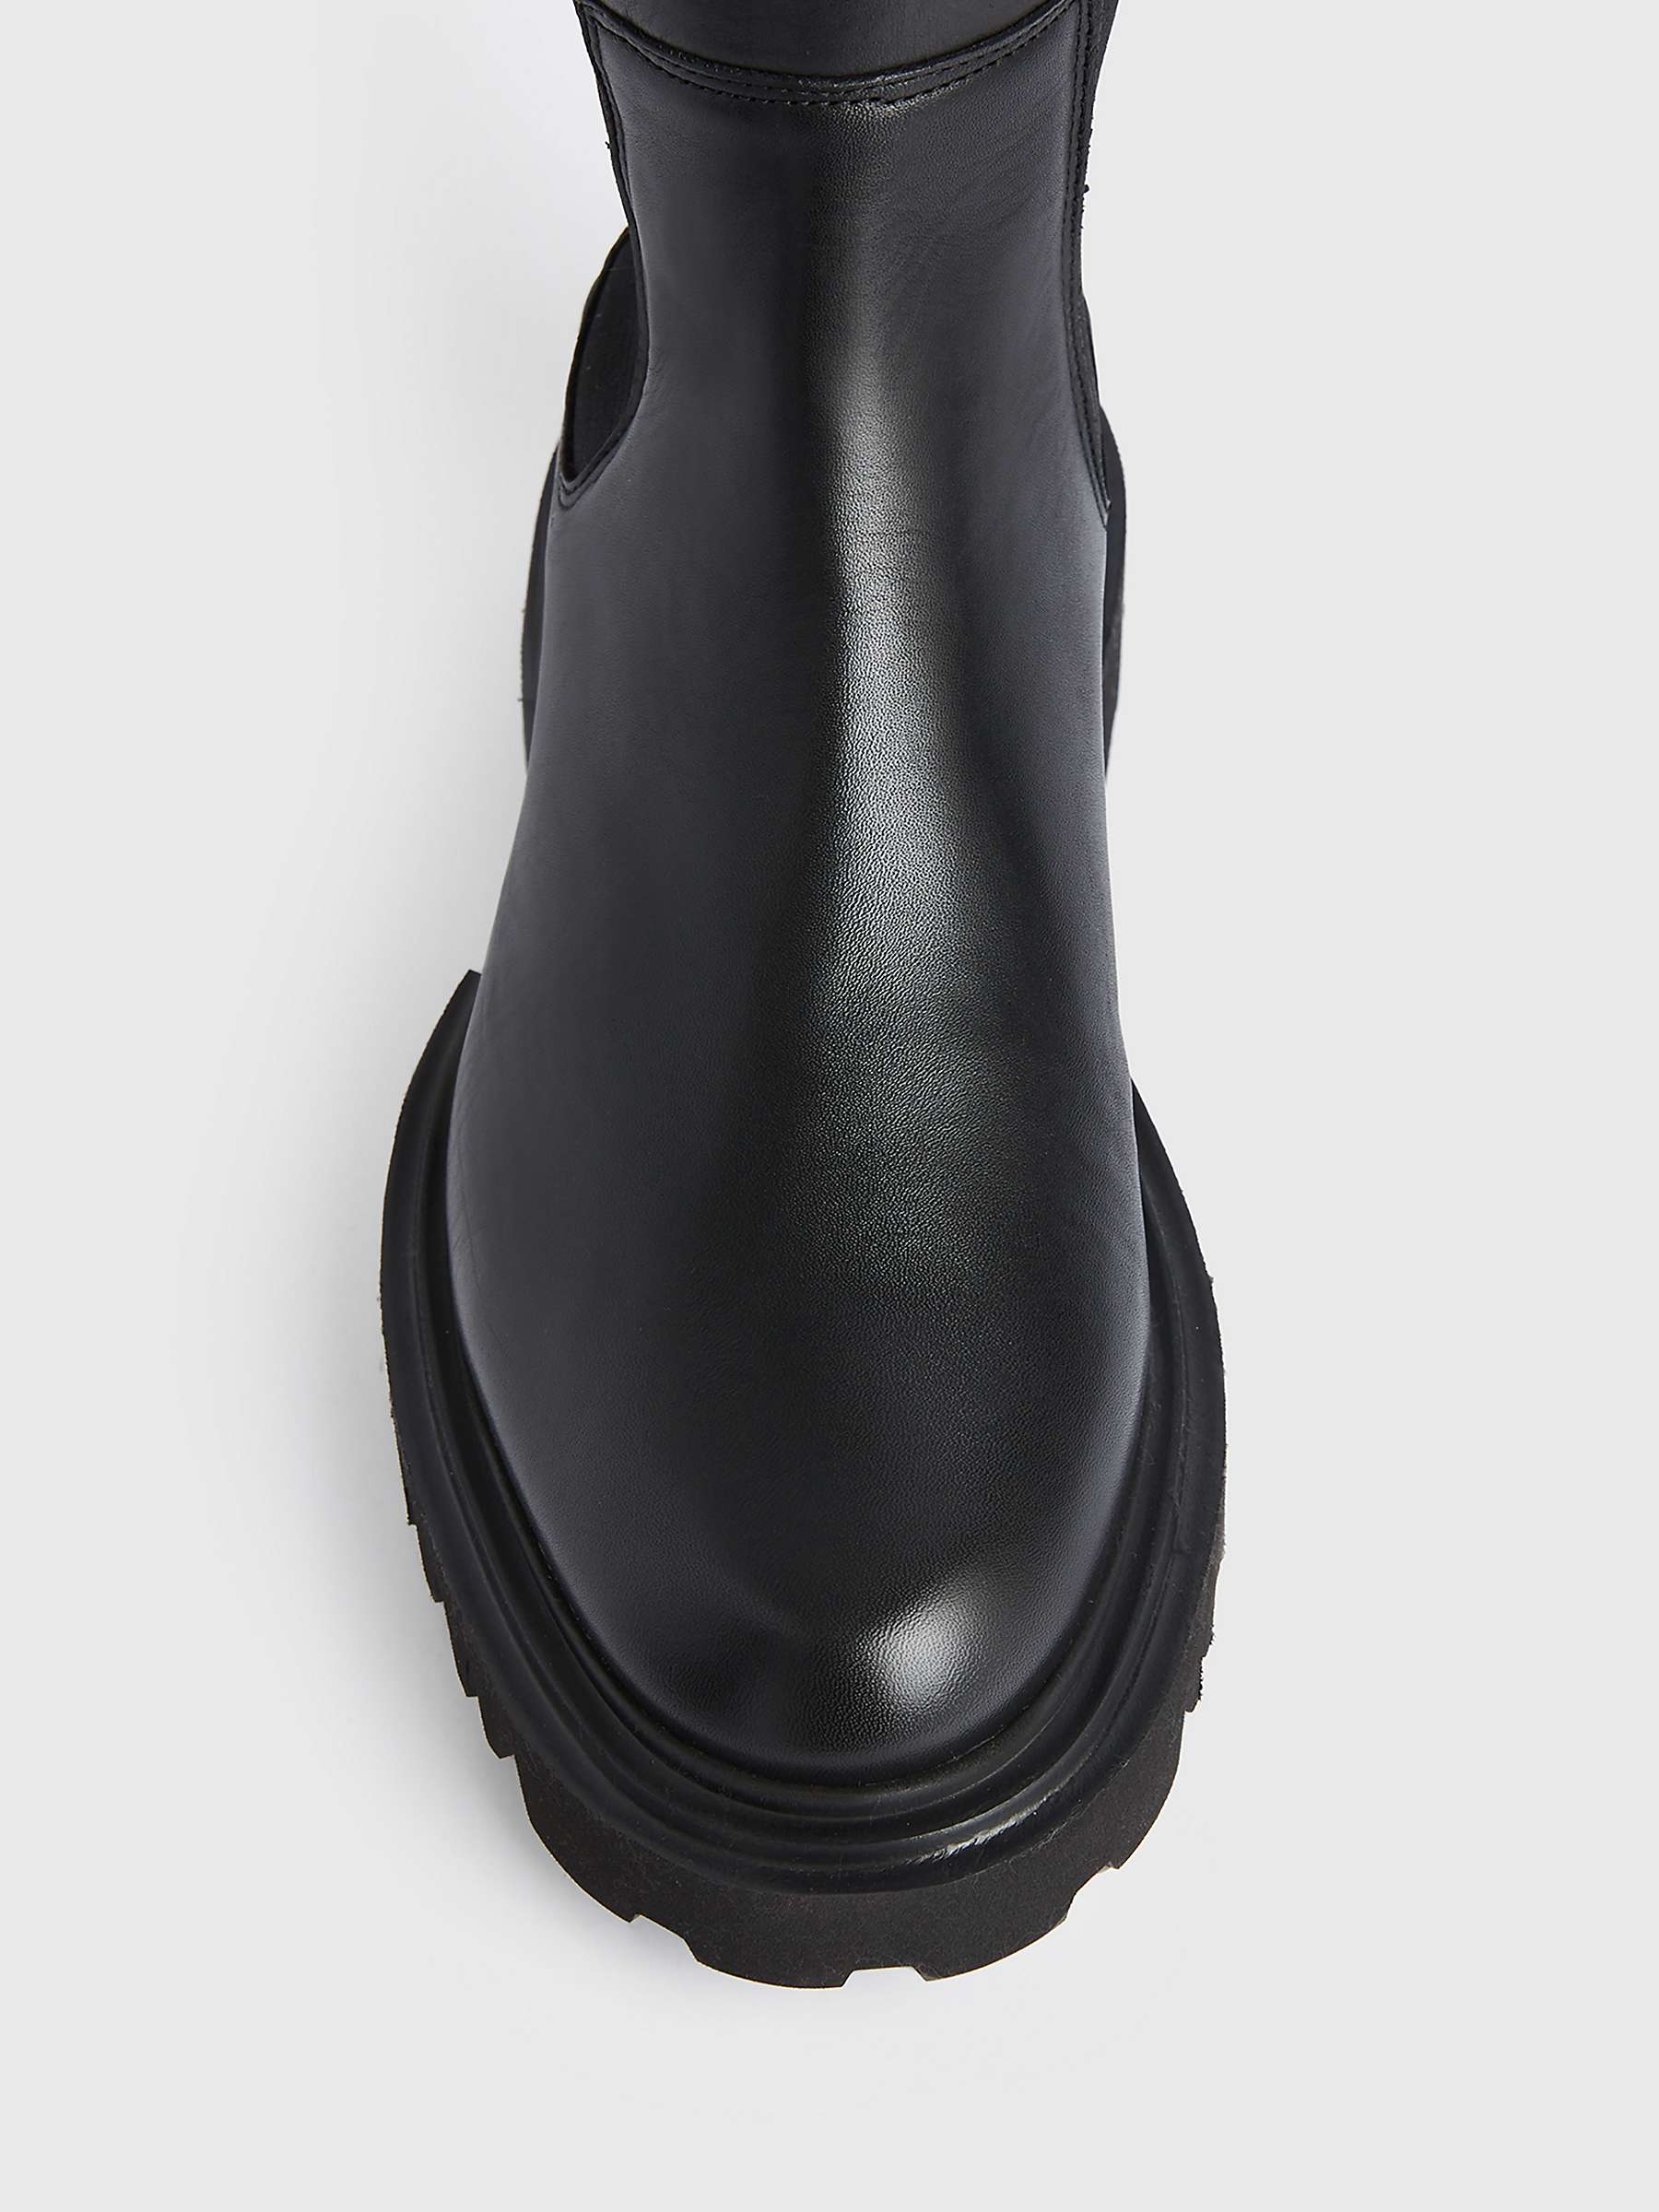 Buy AllSaints Maeve Leather Knee High Boots Online at johnlewis.com